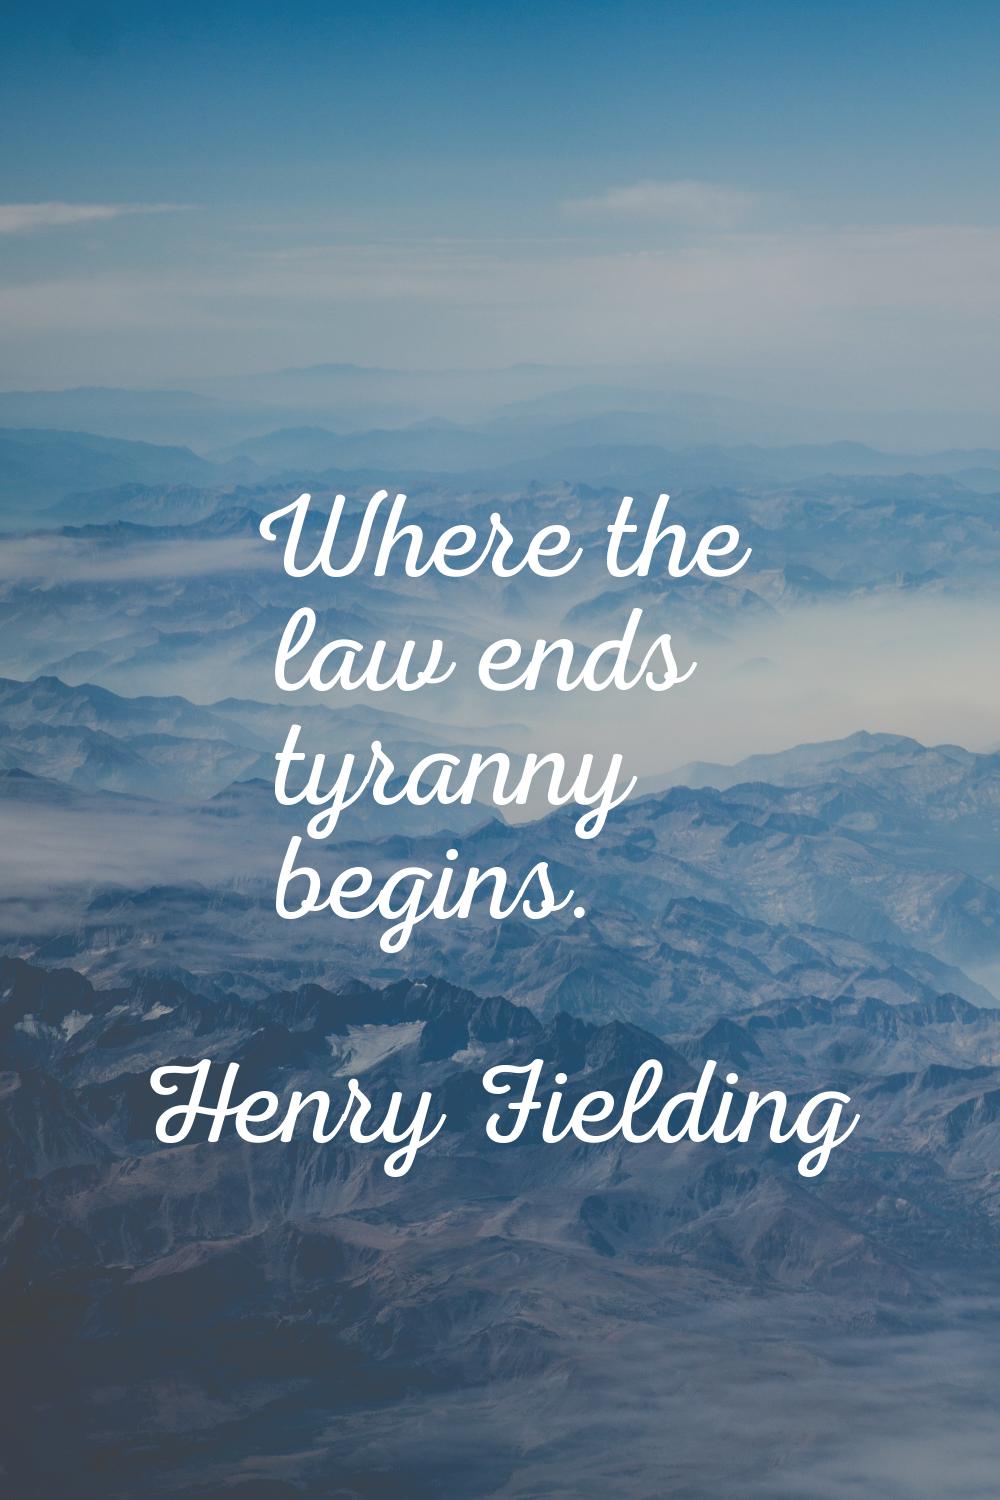 Where the law ends tyranny begins.